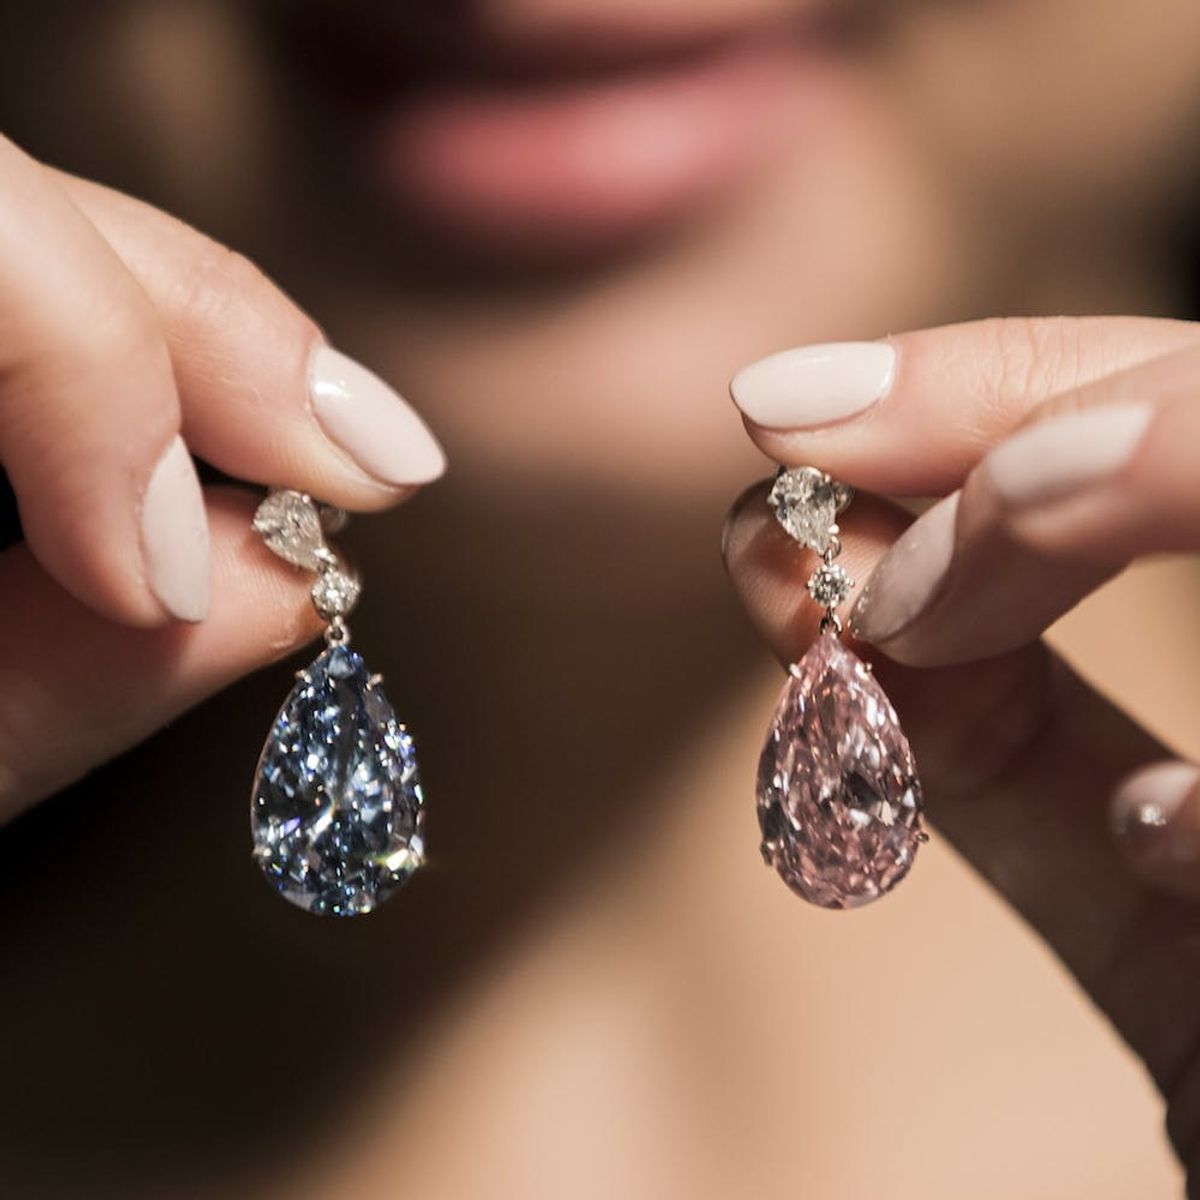 These Earrings Just Became the Most Expensive Ever Sold